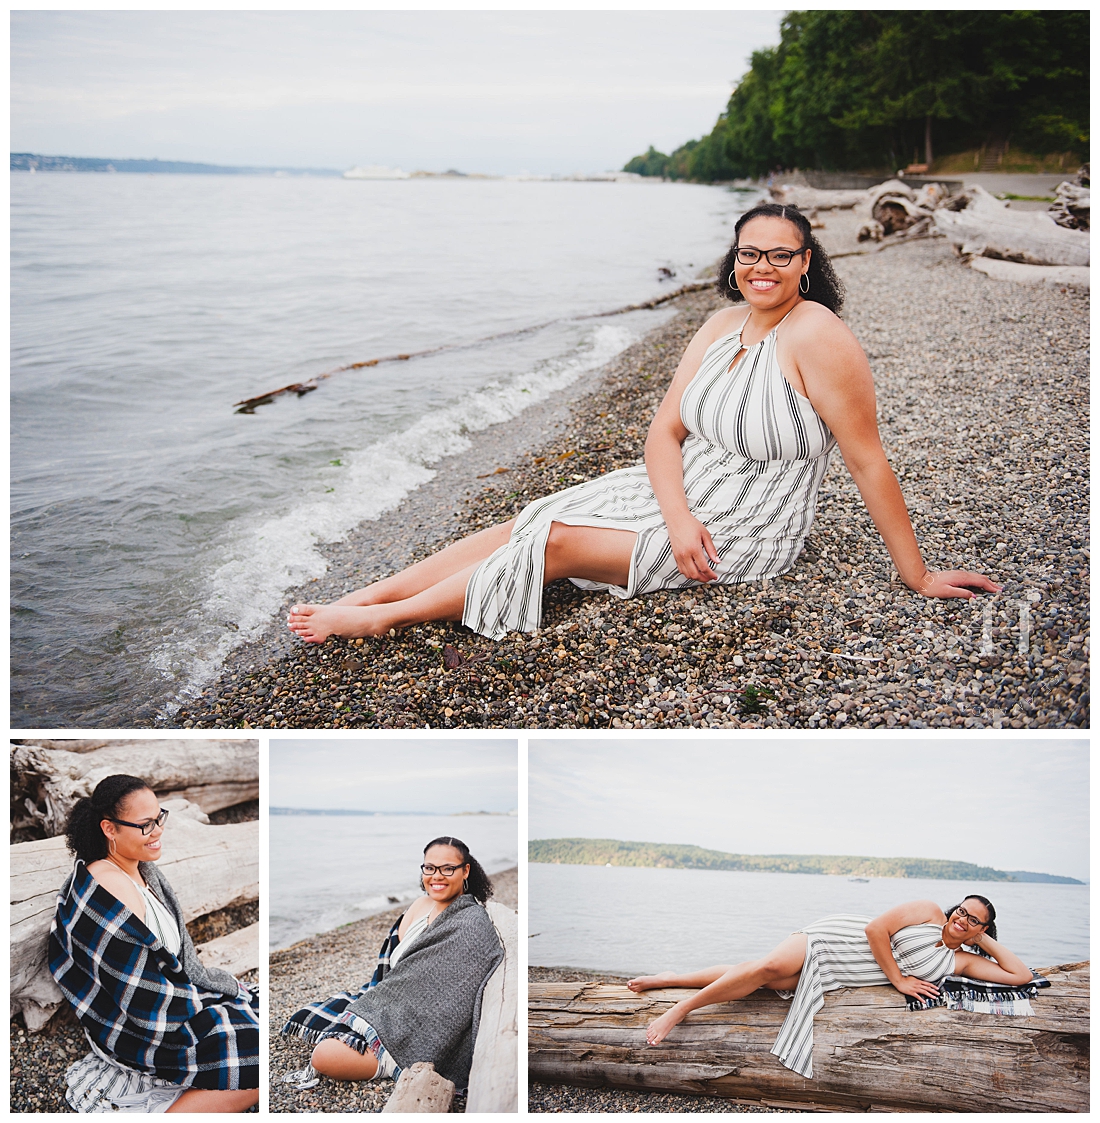 Owen Beach Casual Senior Portraits with Cozy Blanket and Striped Dress Photographed by Tacoma Senior Photographer Amanda Howse